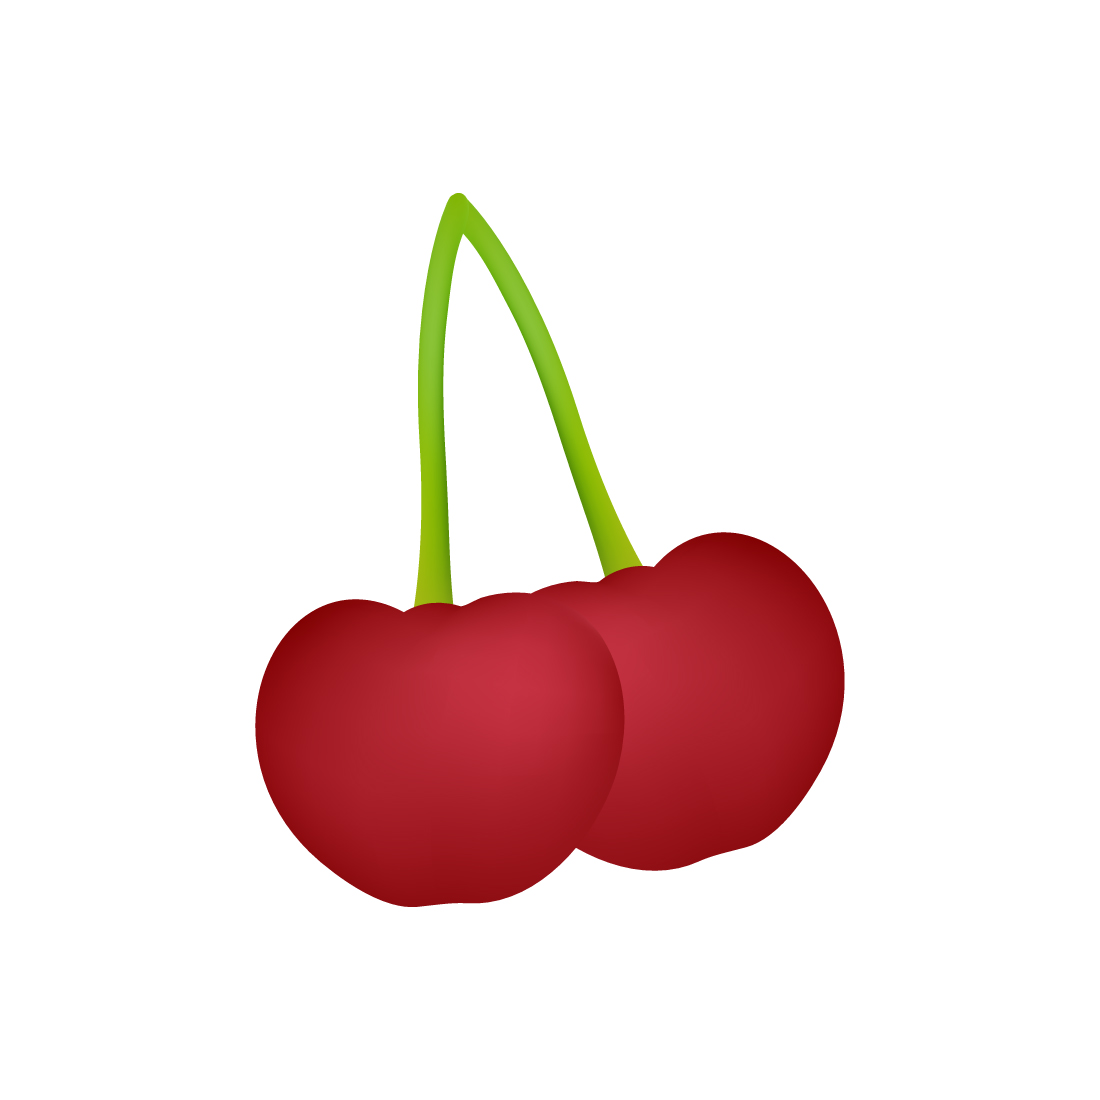 Cherry Illustration On White Background preview image.